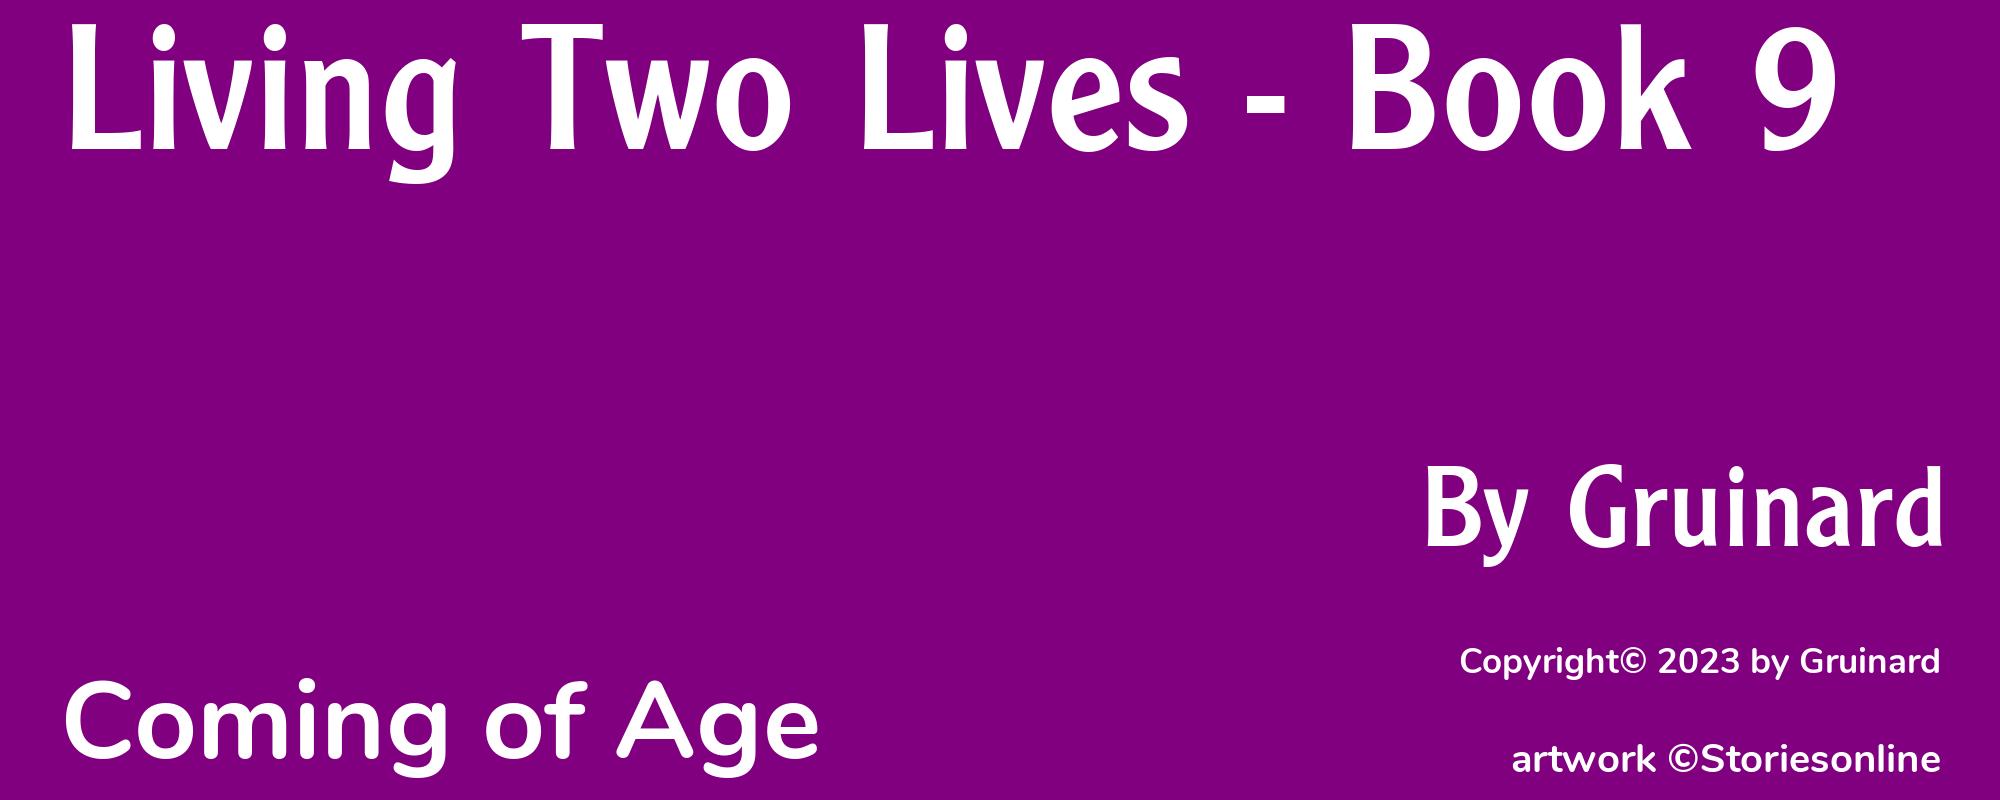 Living Two Lives - Book 9 - Cover